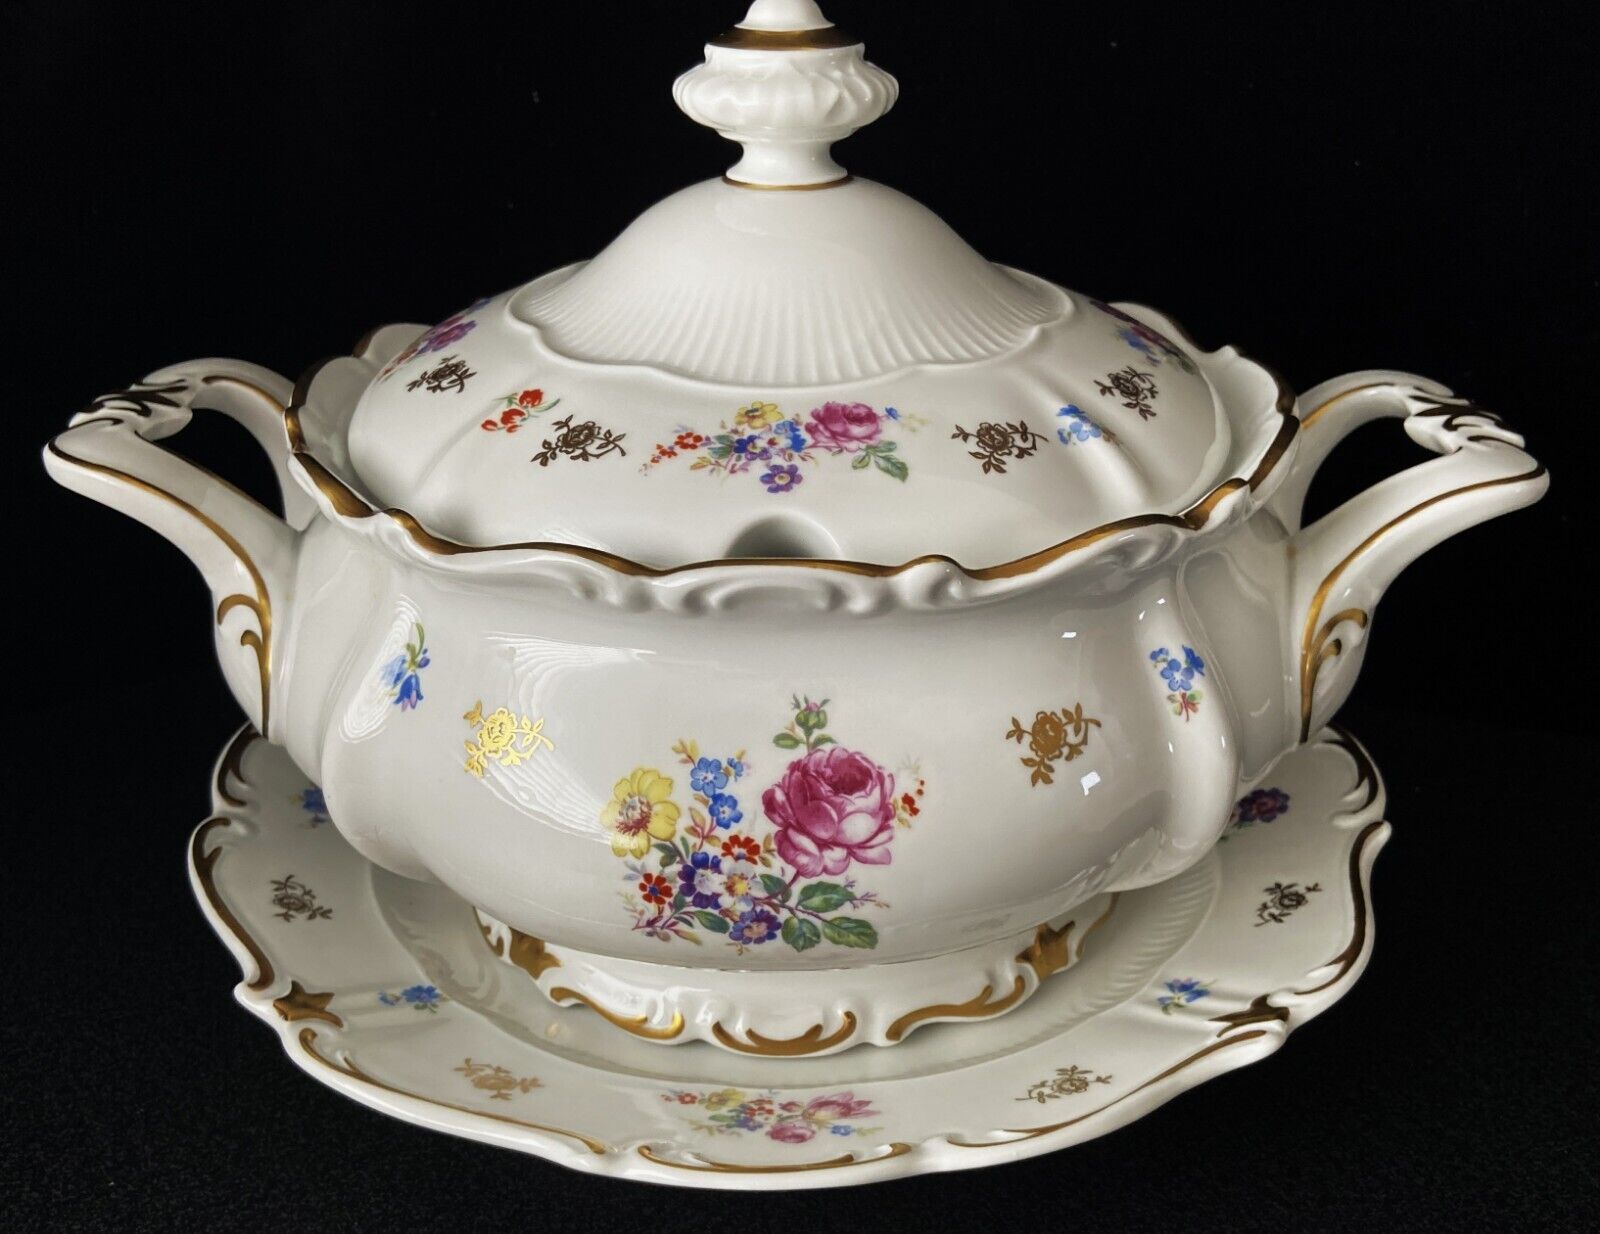 Reichenbach Germany Porcelain Footed Soup Tureen with Lid and Underplate